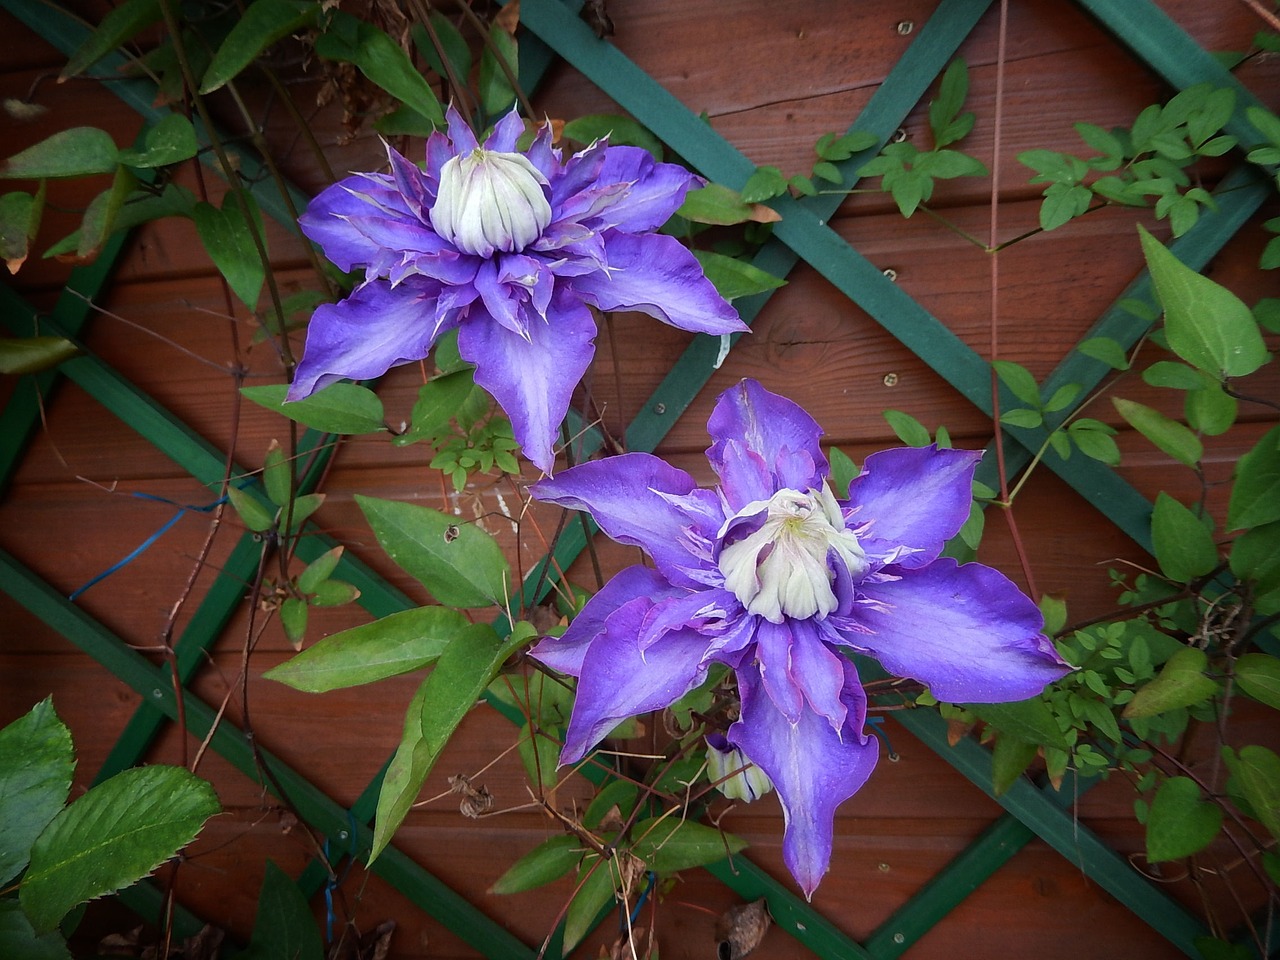 clematis violet rank growths free photo